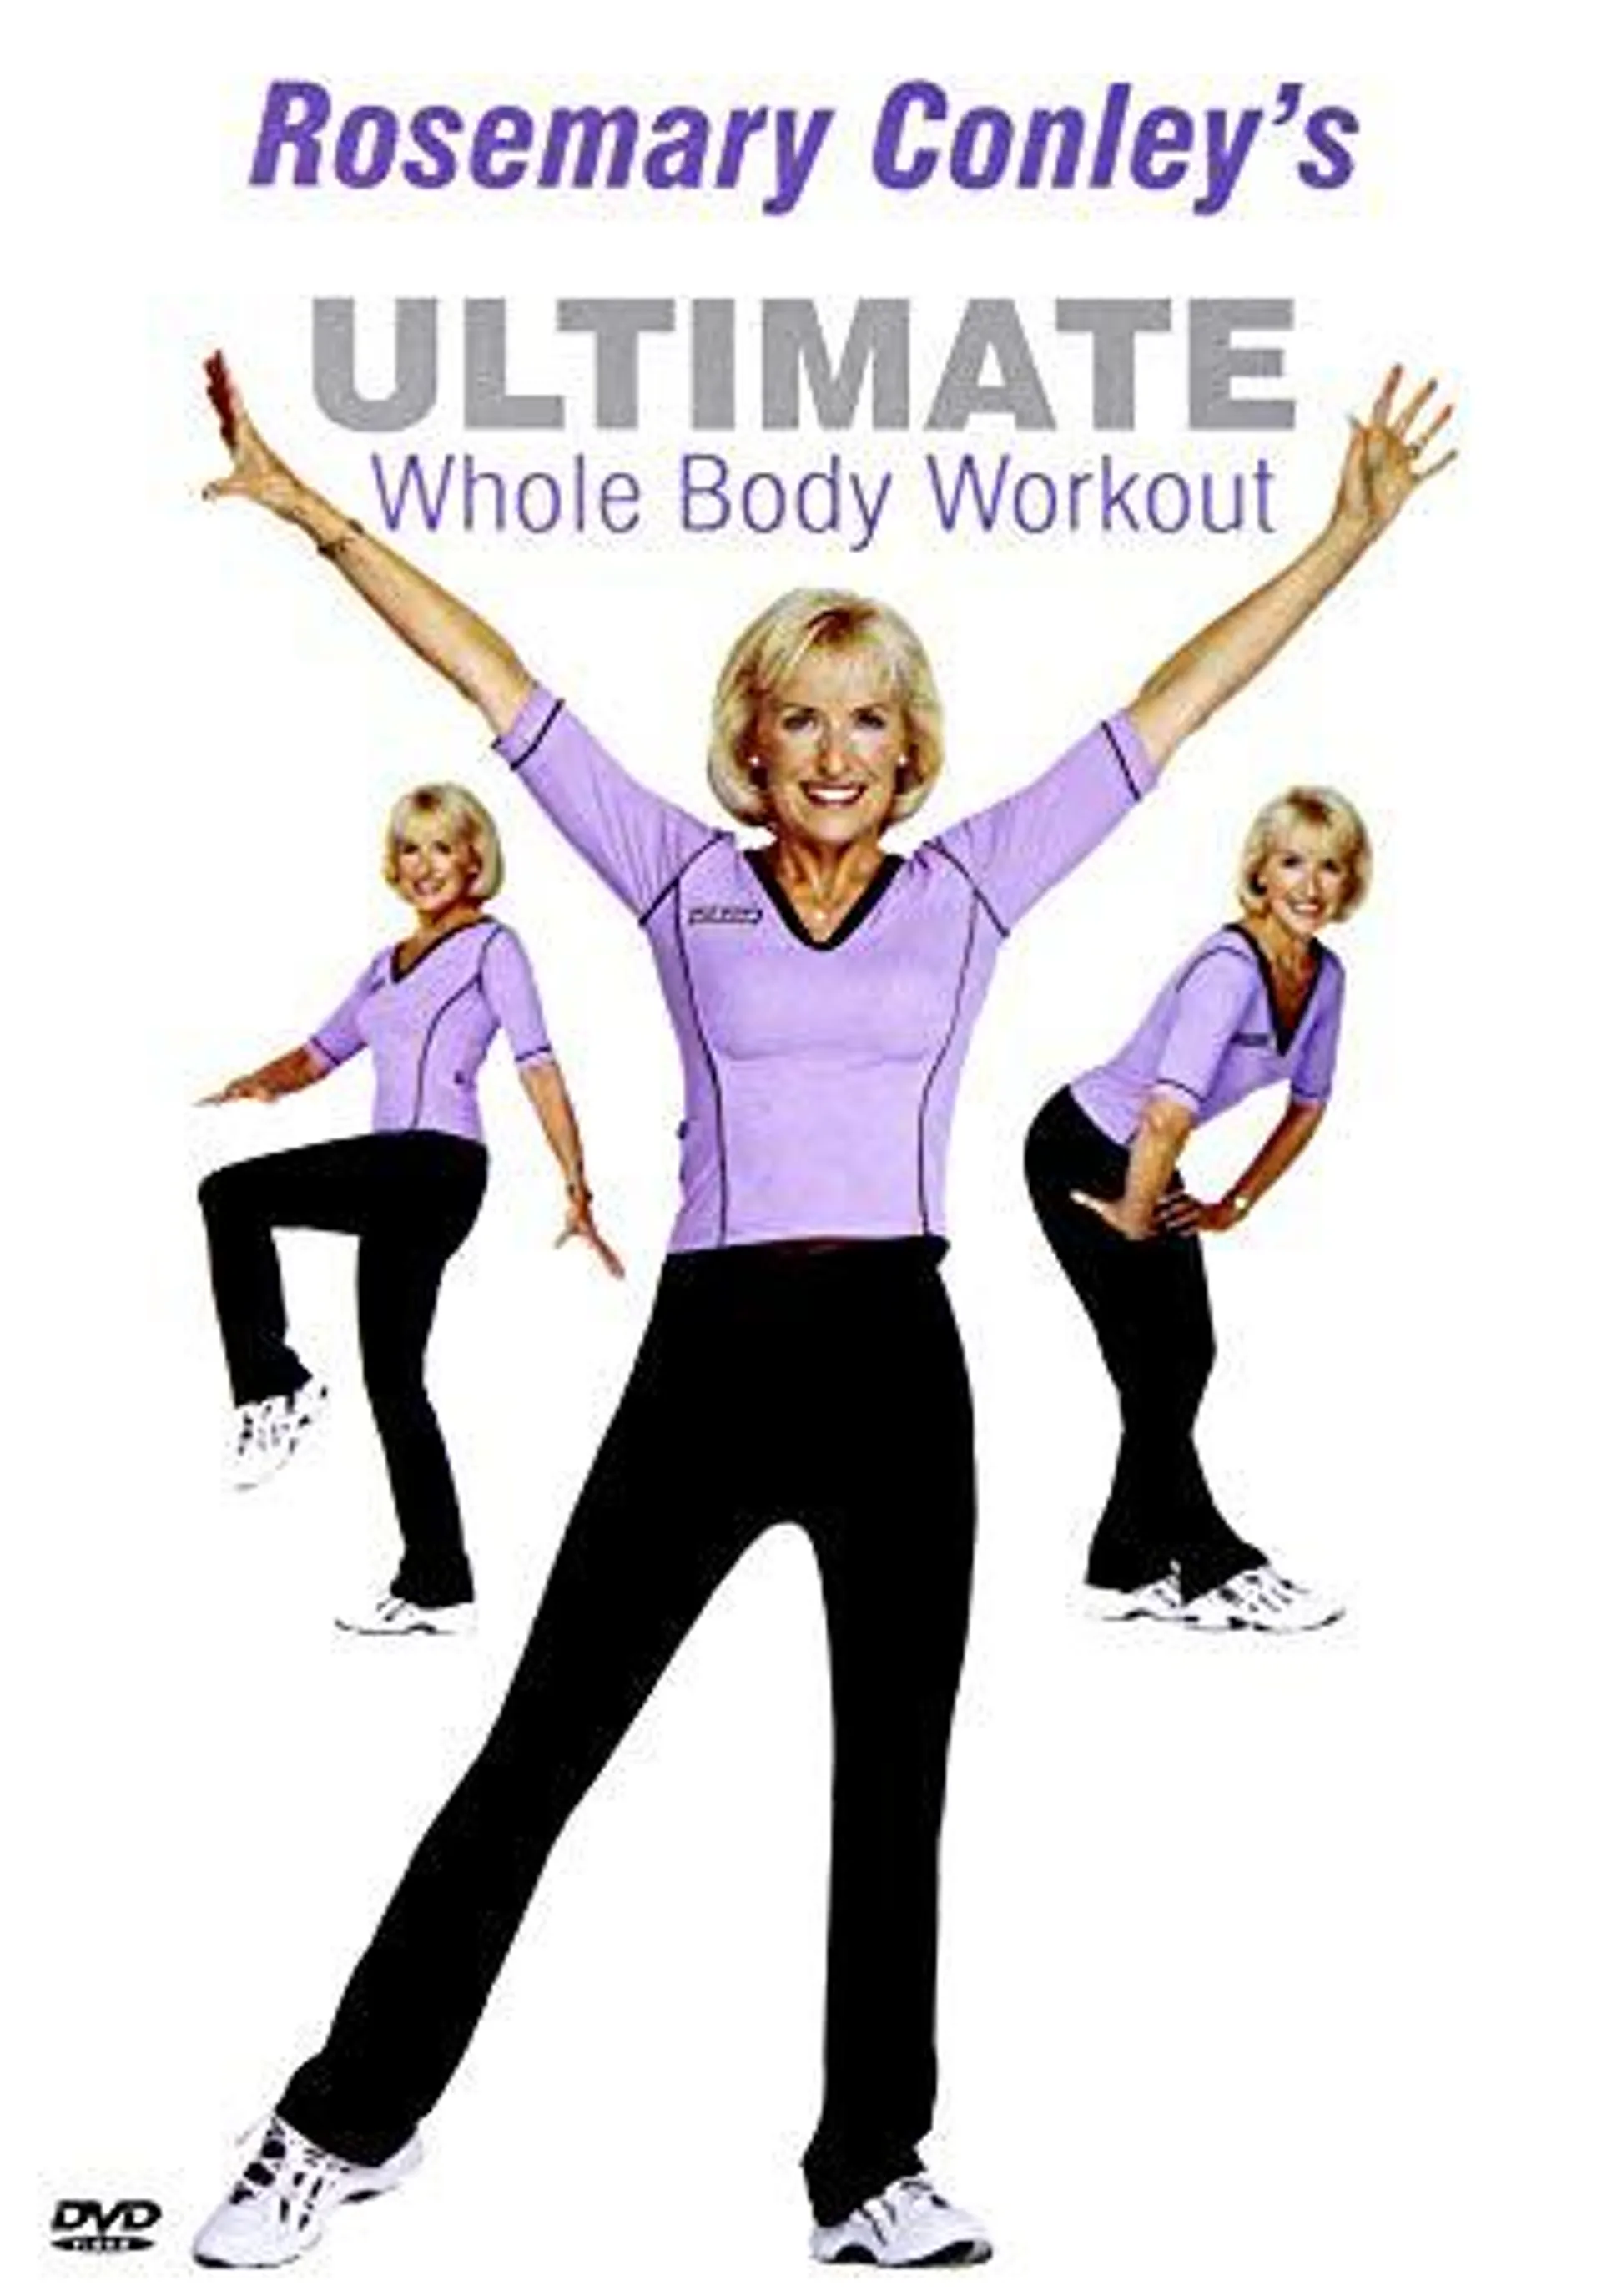 Rosemary Conley - Rosemary Conley - Ultimate Whole Body Workout